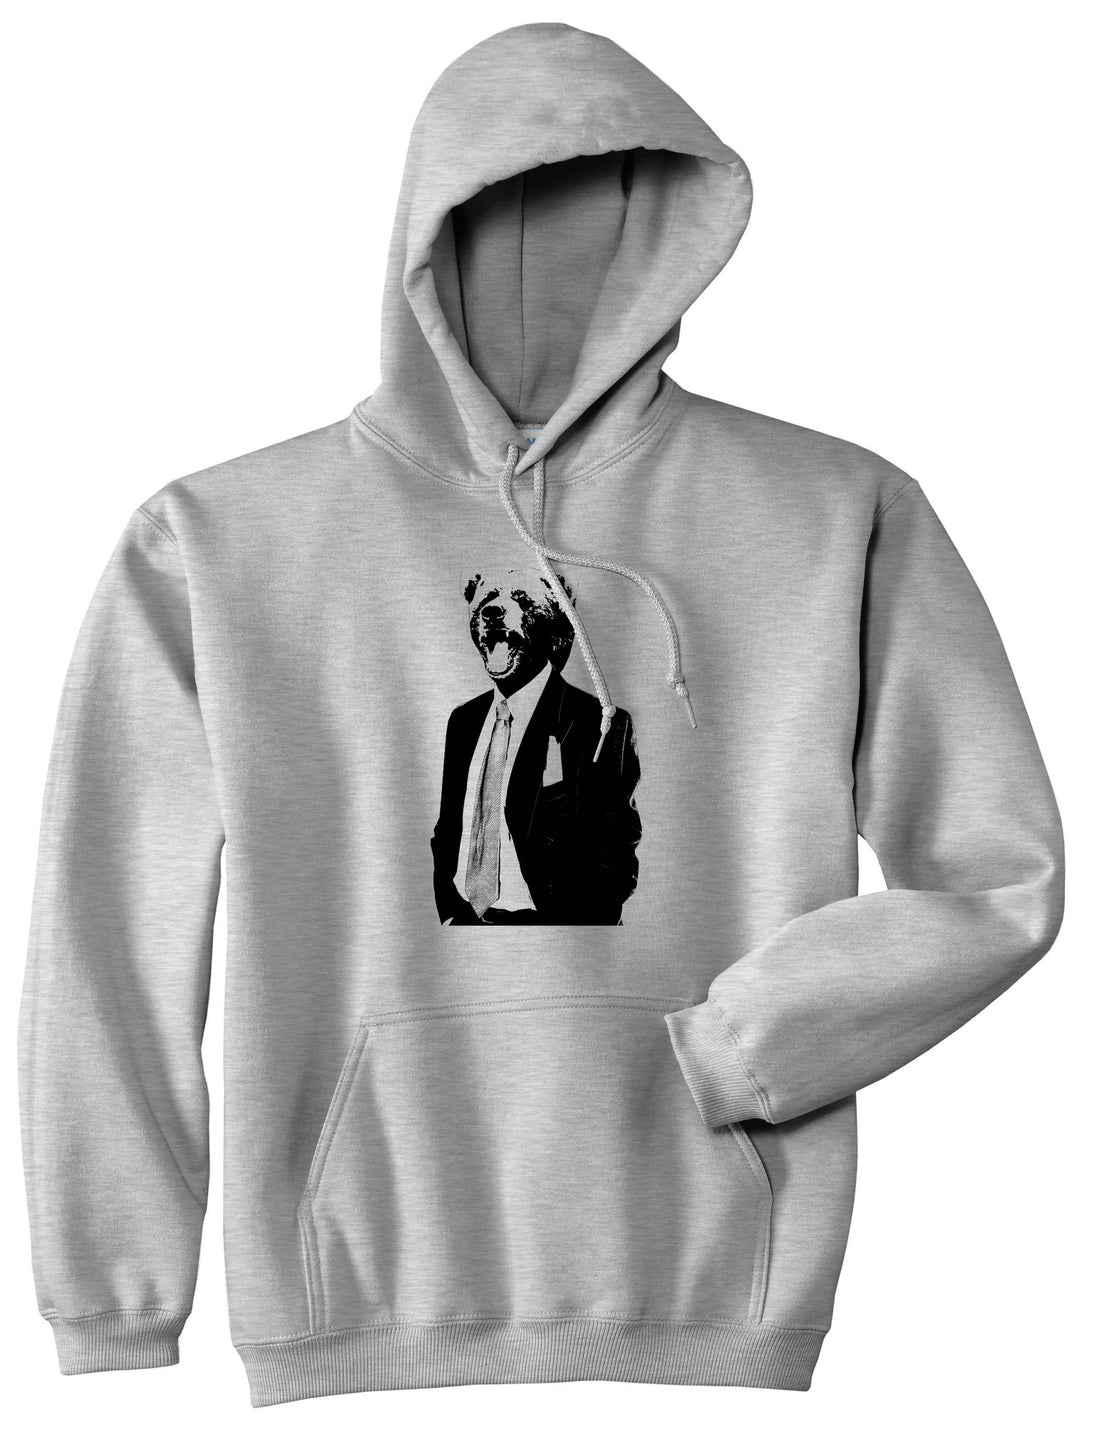 Bear In Suit Funny Pullover Hoodie